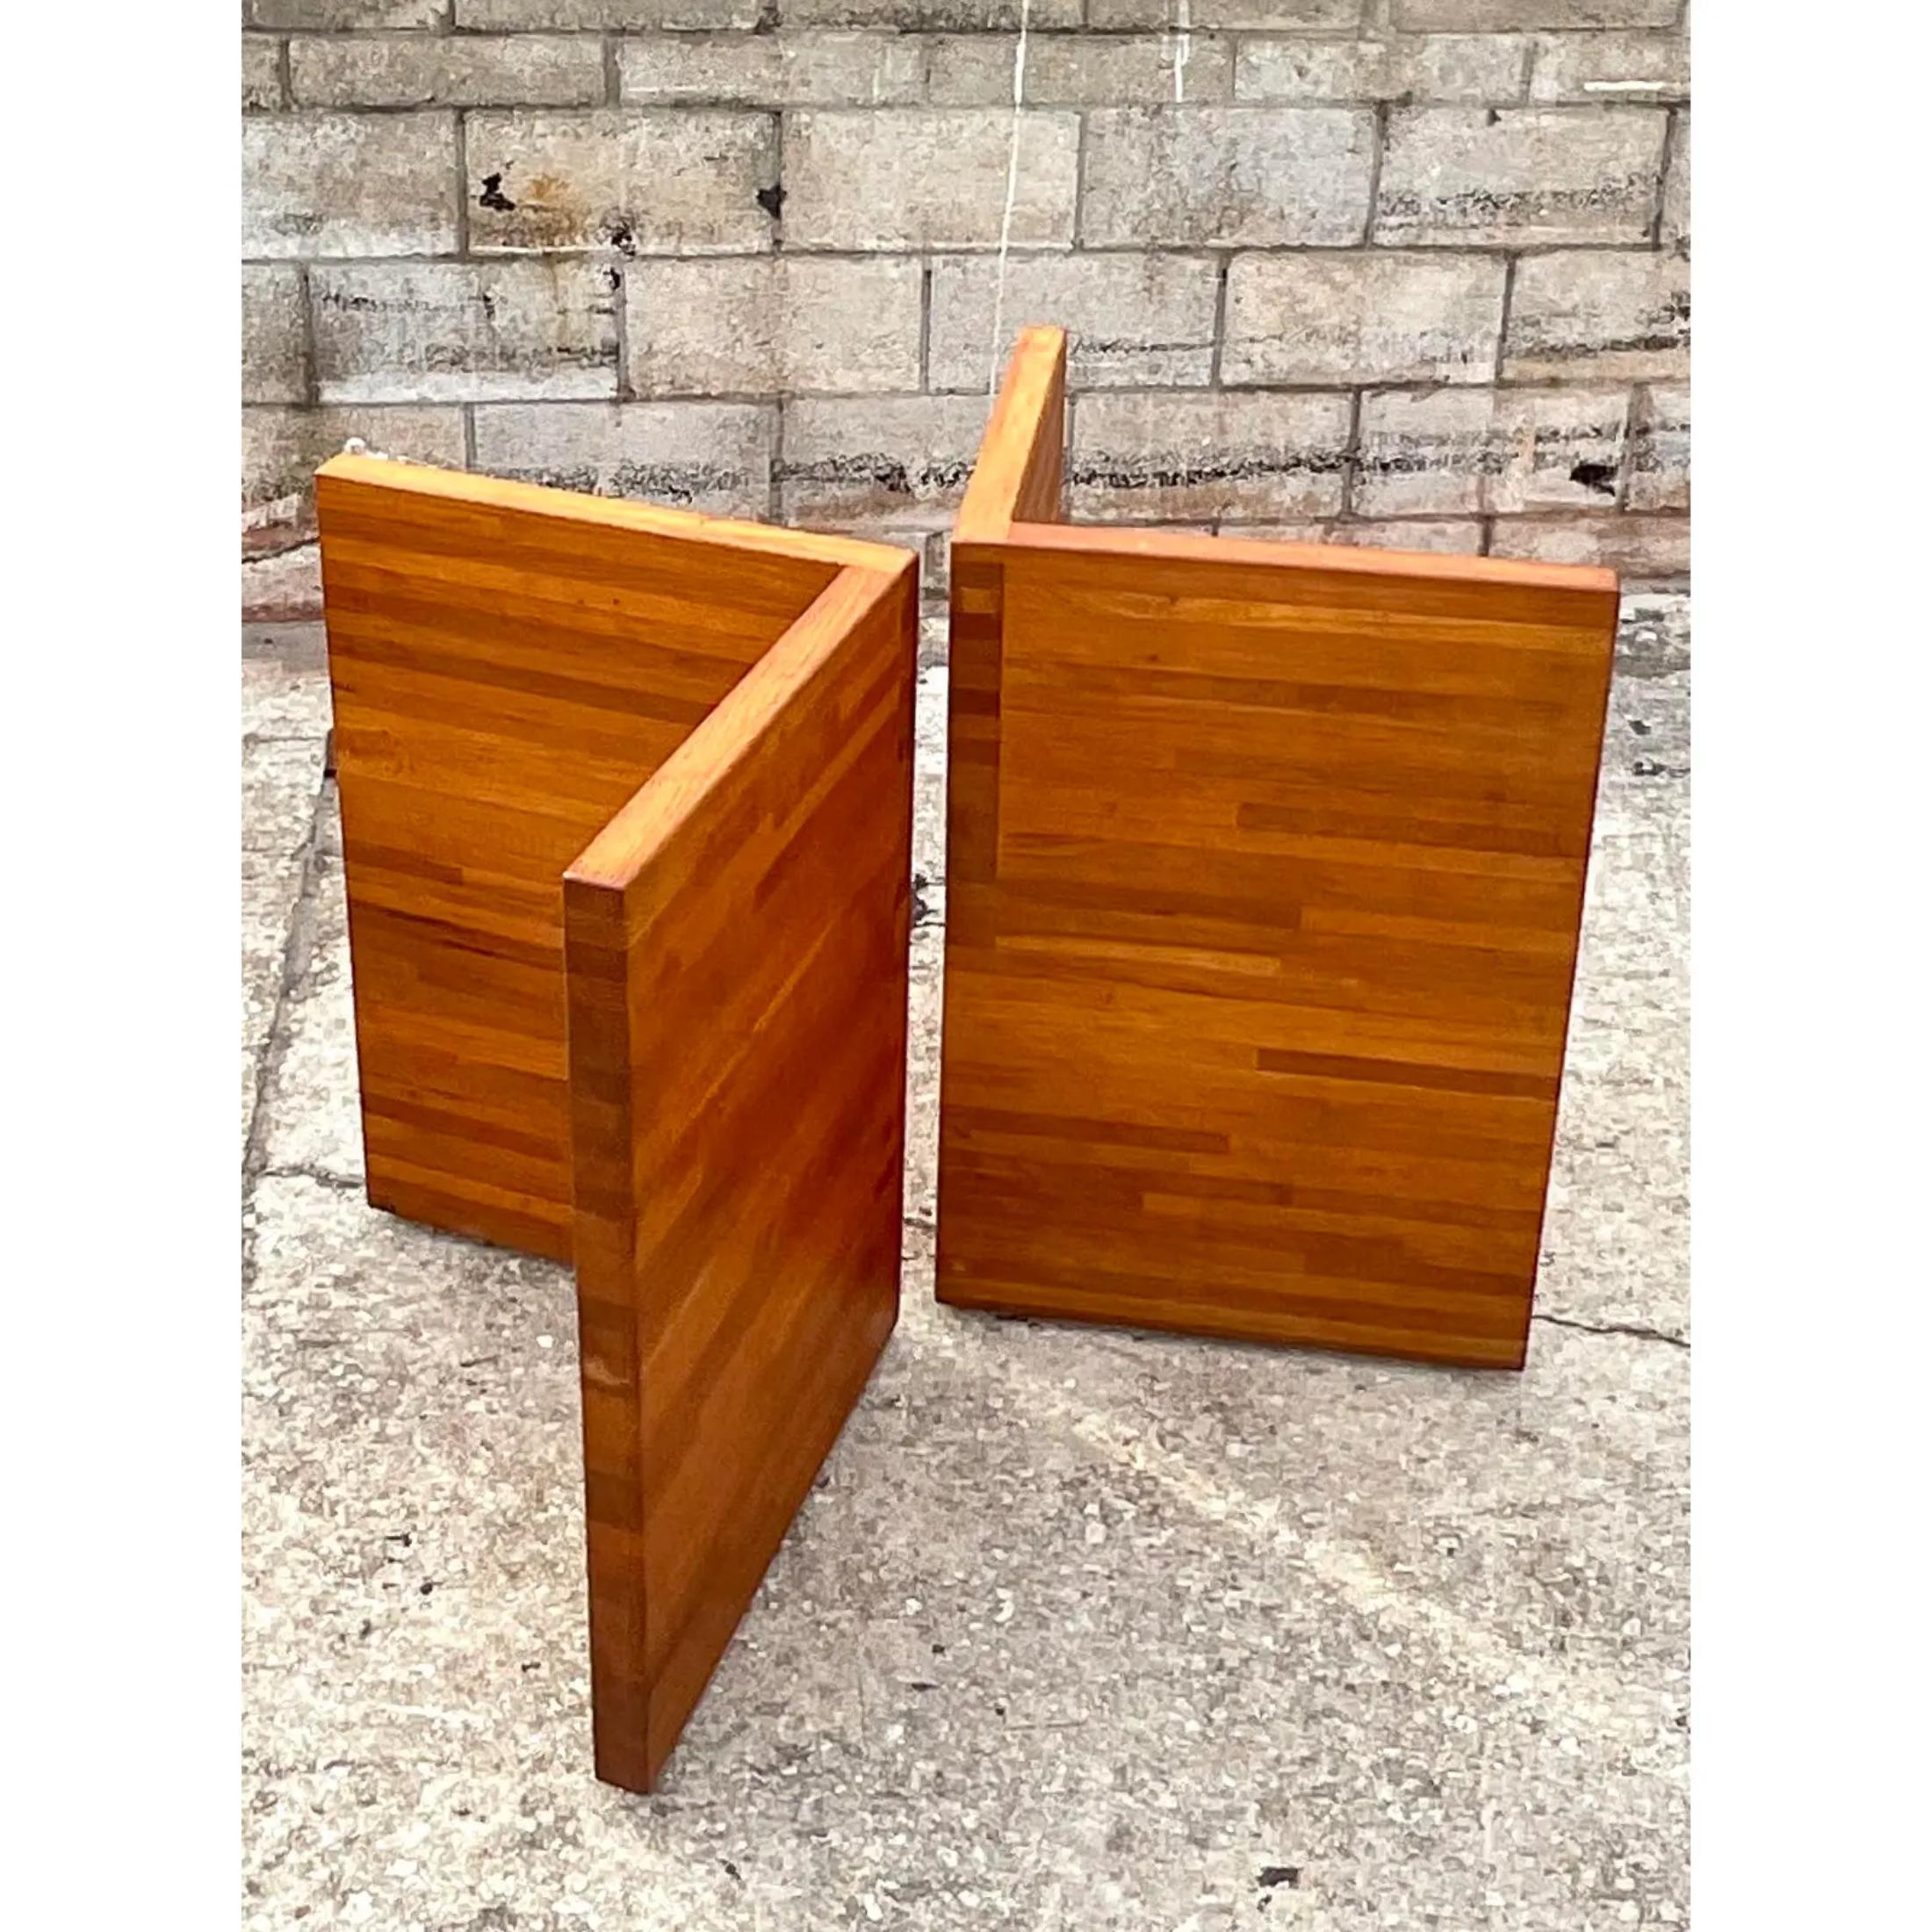 Midcentury Slab Butcher Block L Shaped Dining Table Pedestals - a Pair 1